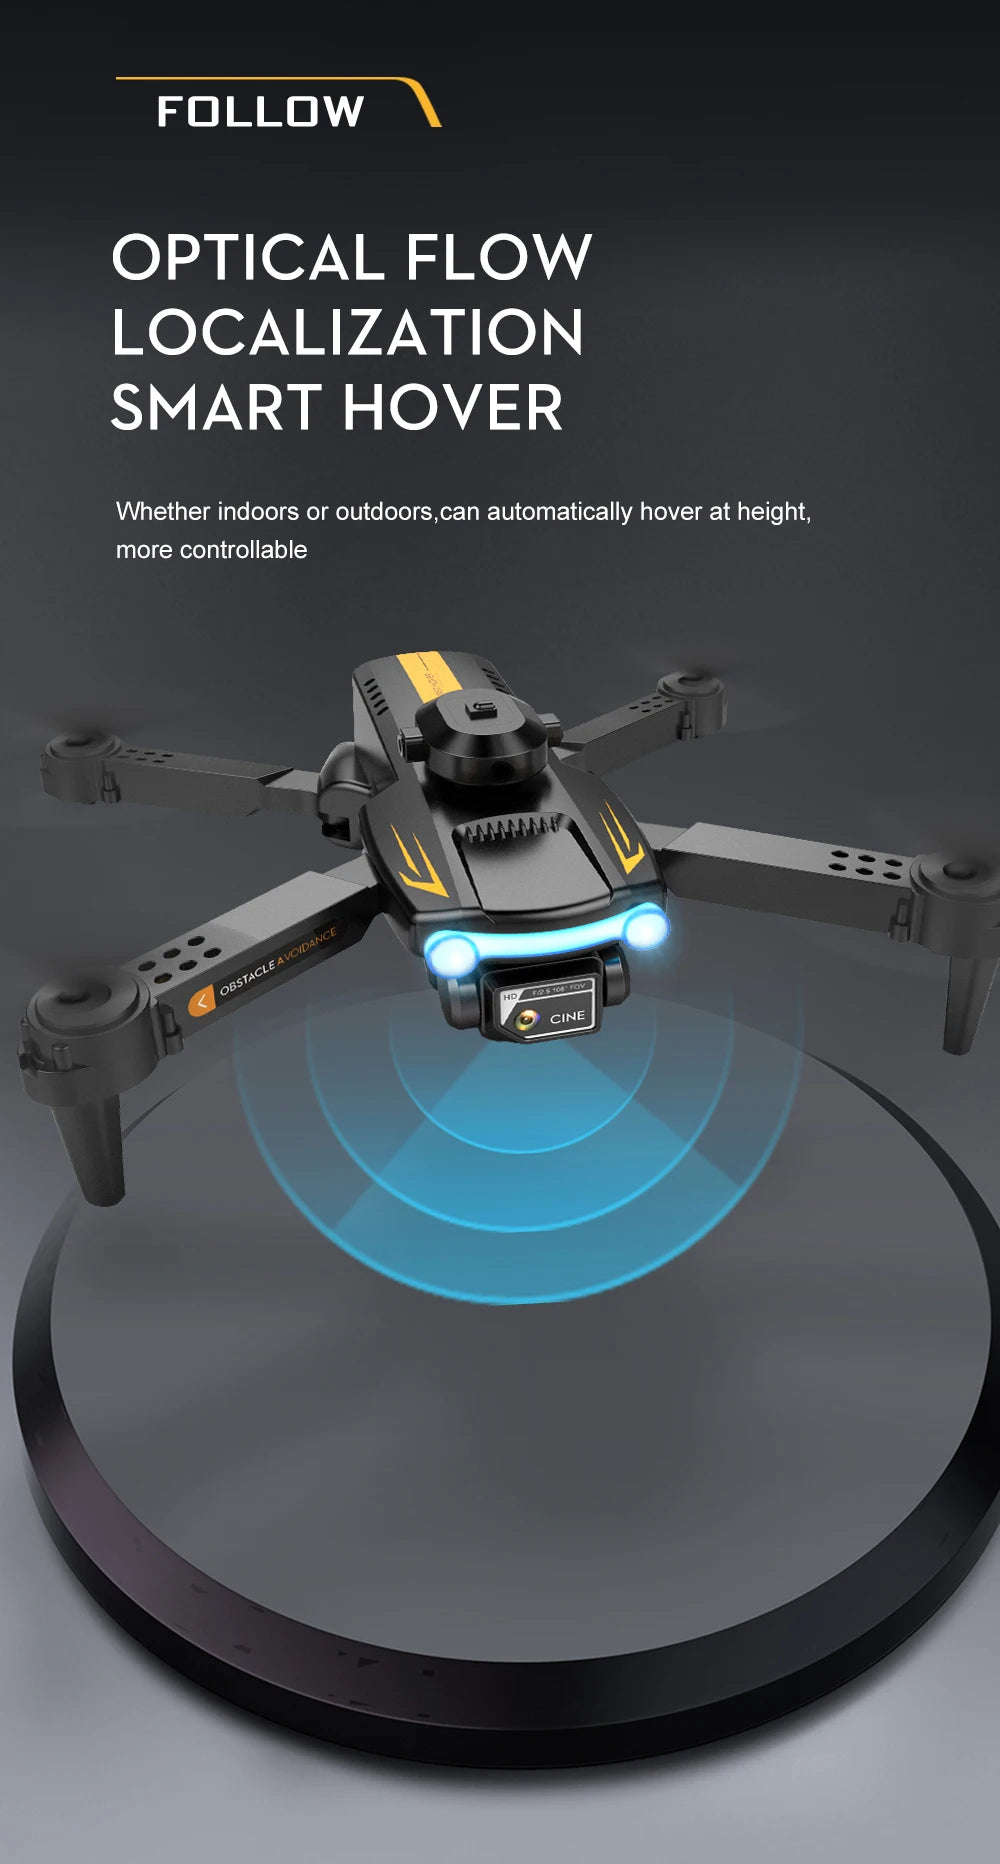 LSRC XT2 Drone, follow optical flow localization smart hover whether indoors or outdoors,can